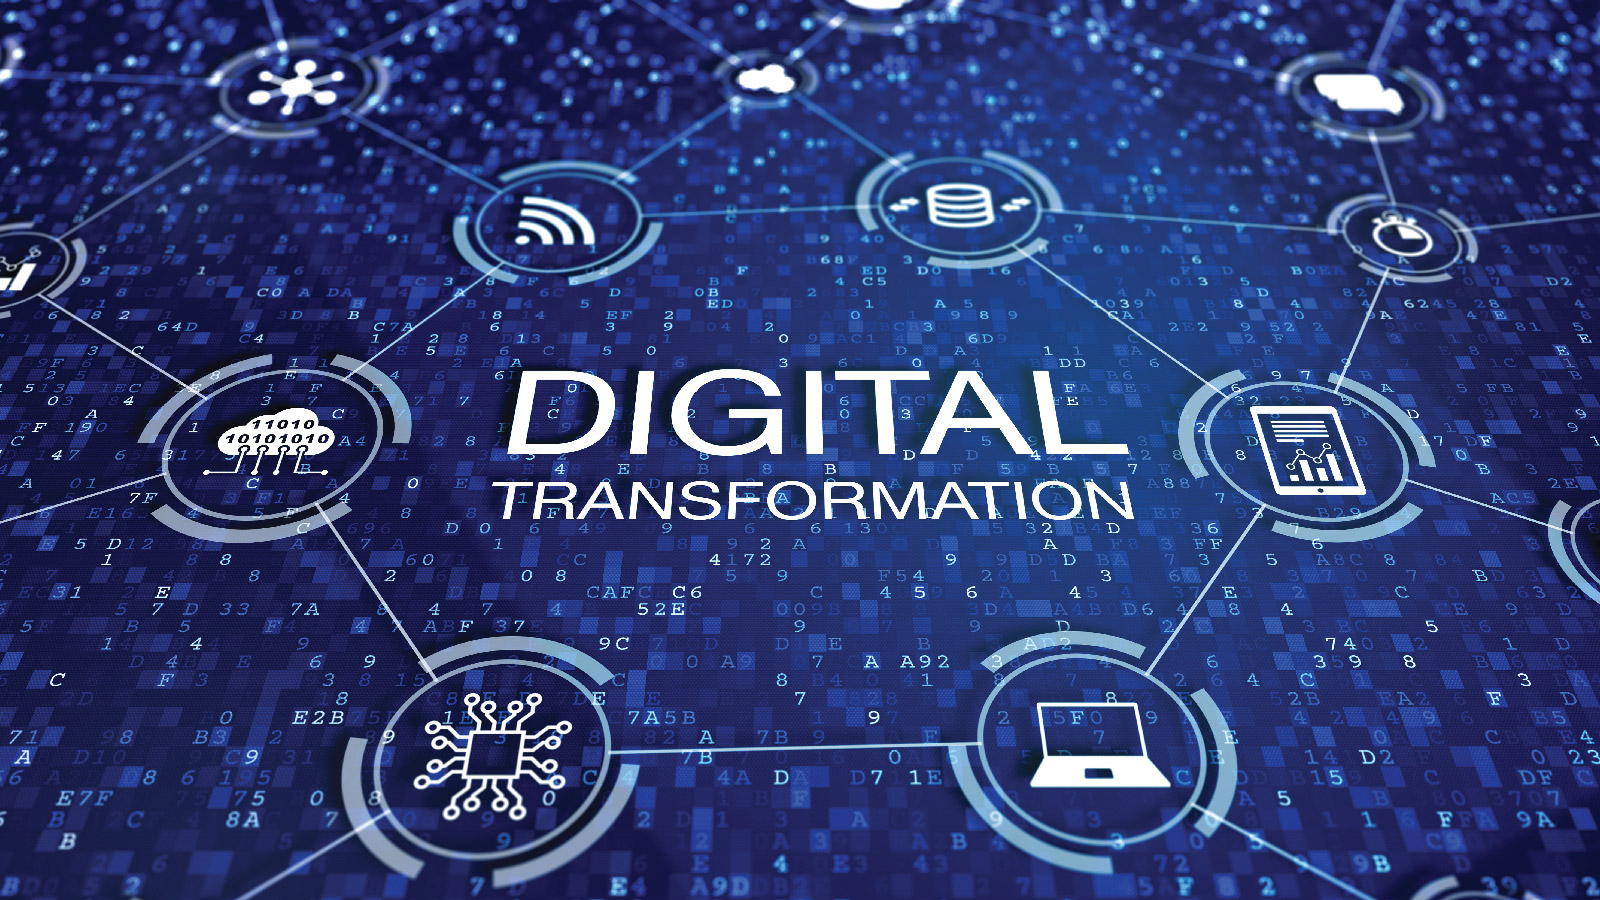 CEO's in Total Control of the Digital Transformation Using ERP